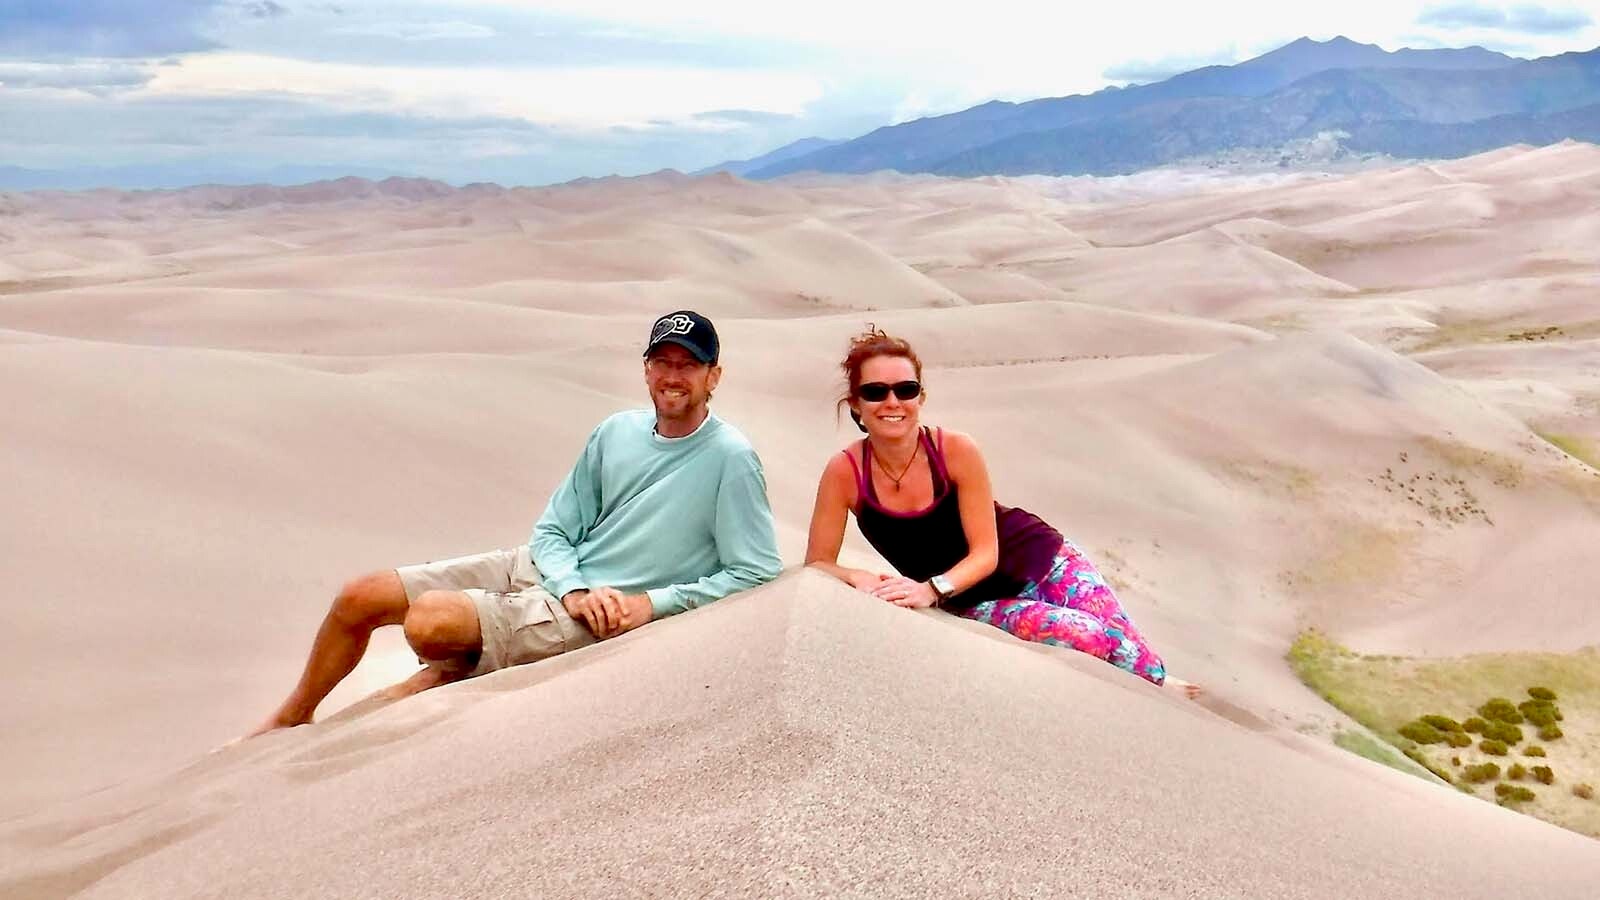 Scott and Tiffany Sink on High Dune at Great Sand Dunes National Park in southern Colorado in 2018.